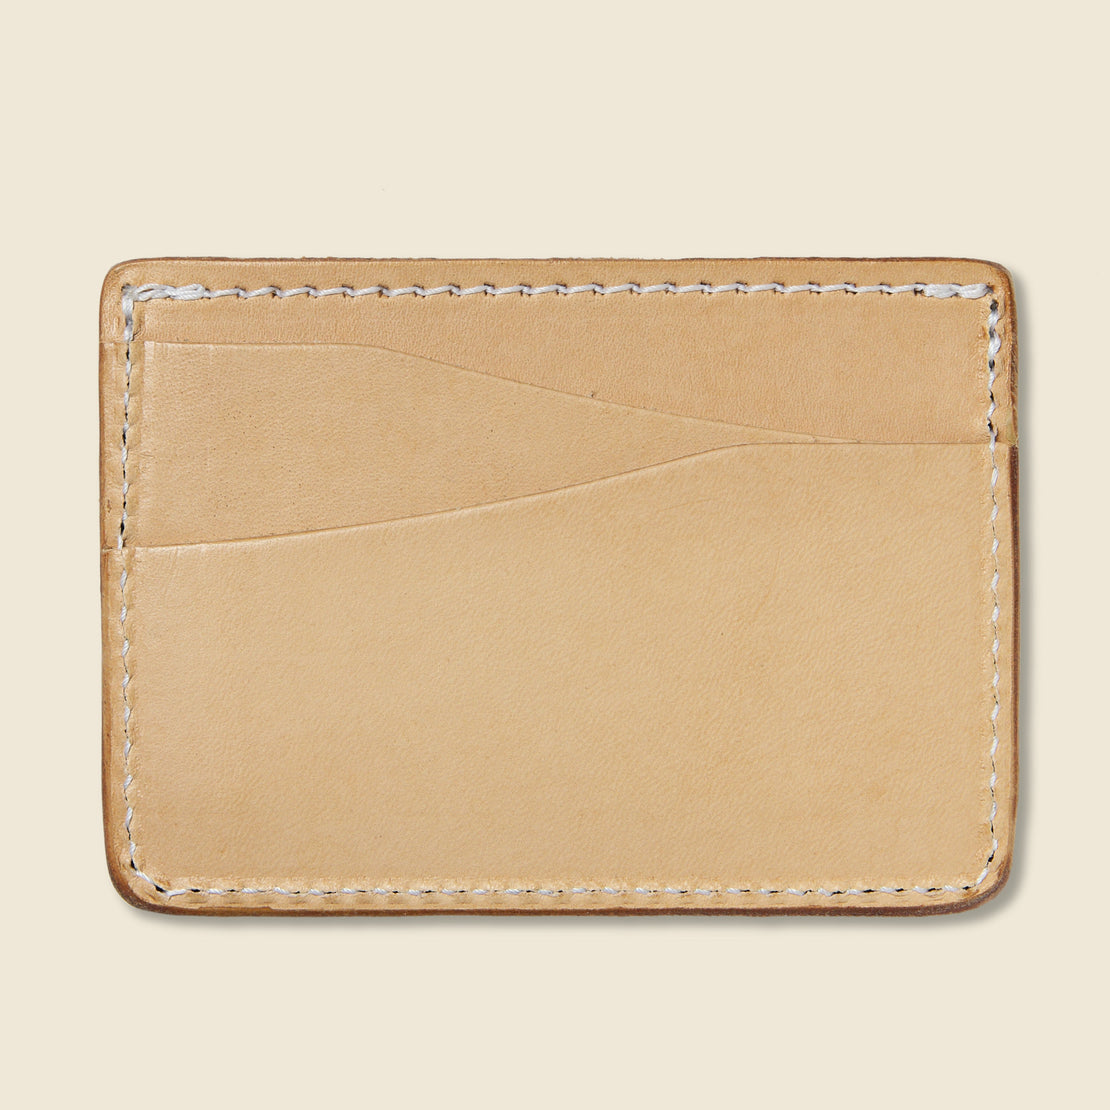 Journeyman Wallet - Natural - Tanner - STAG Provisions - Accessories - Wallets